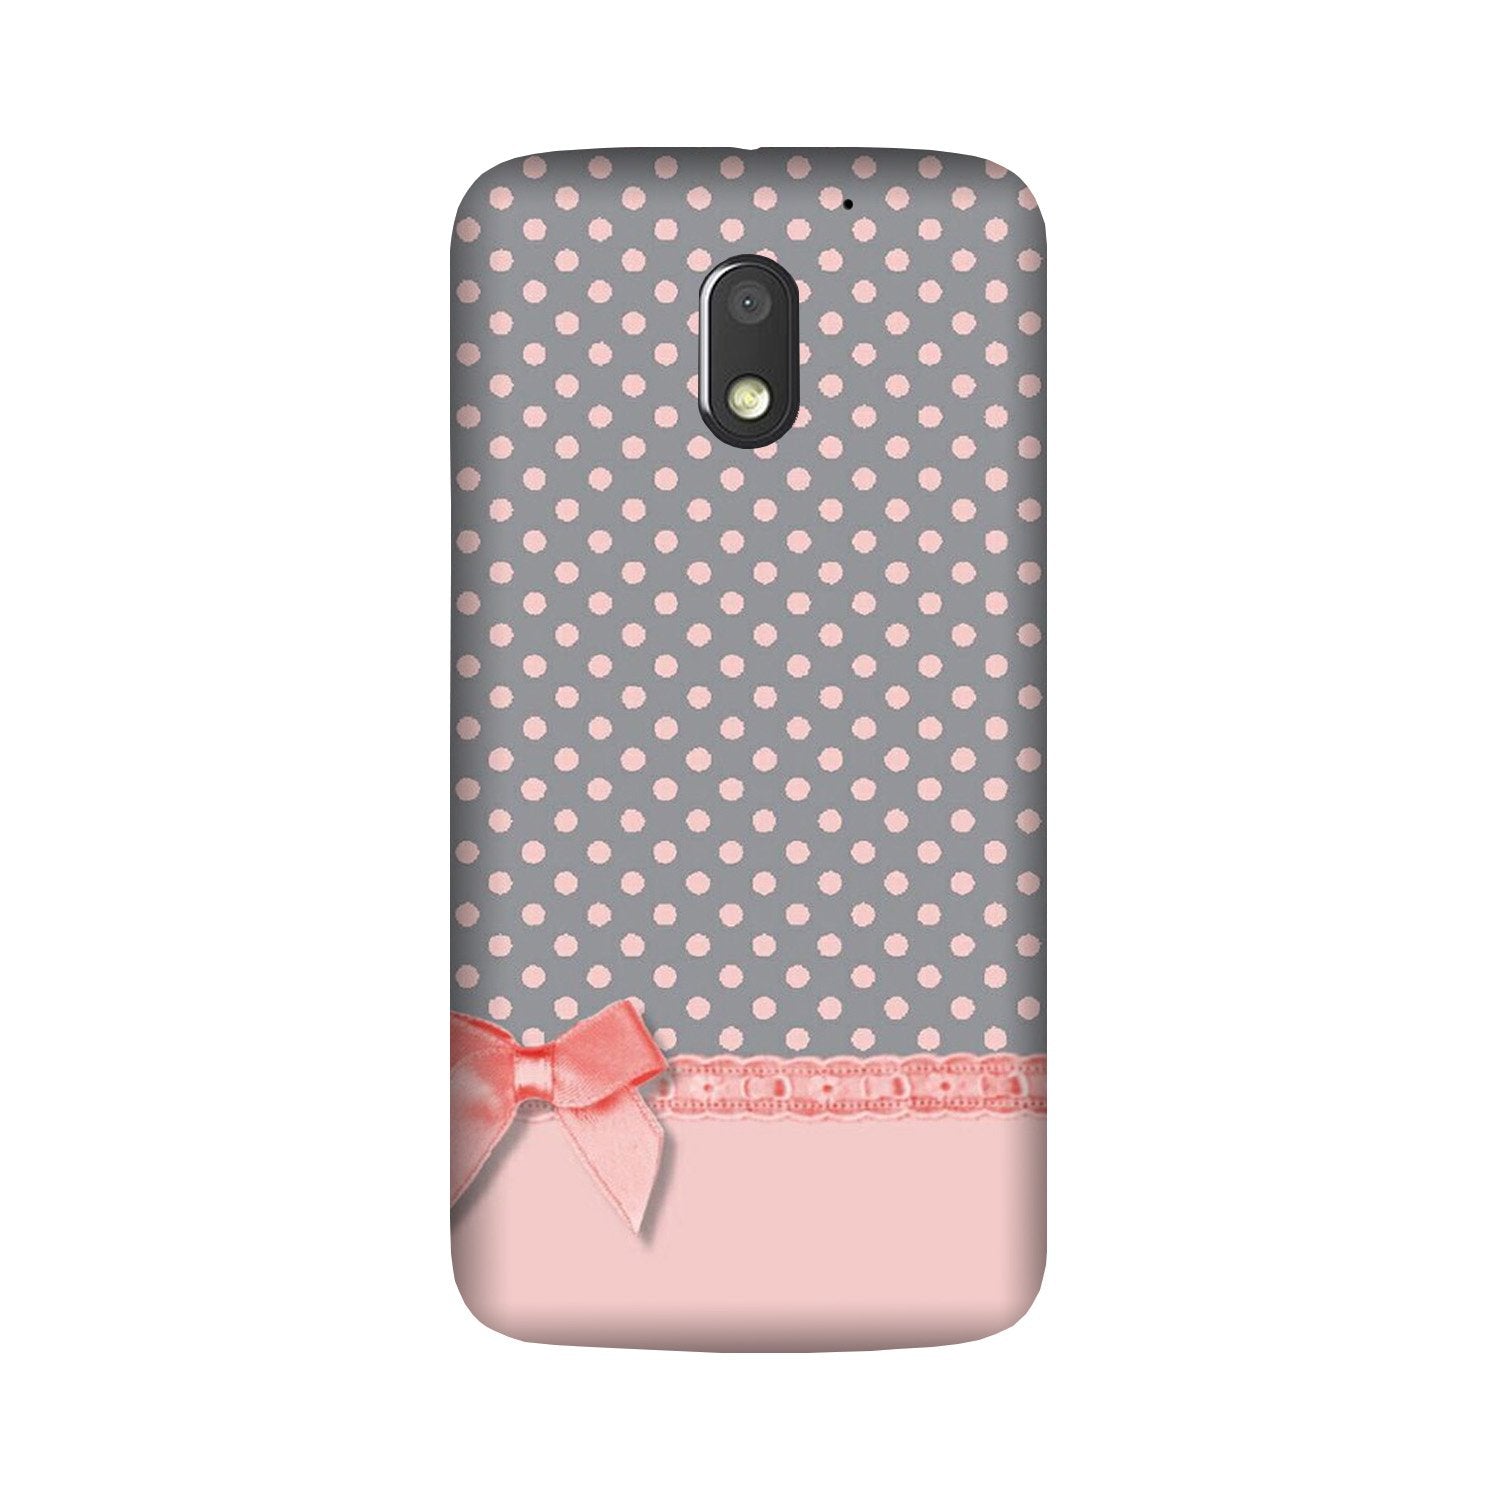 Gift Wrap2 Case for Moto G4 Play